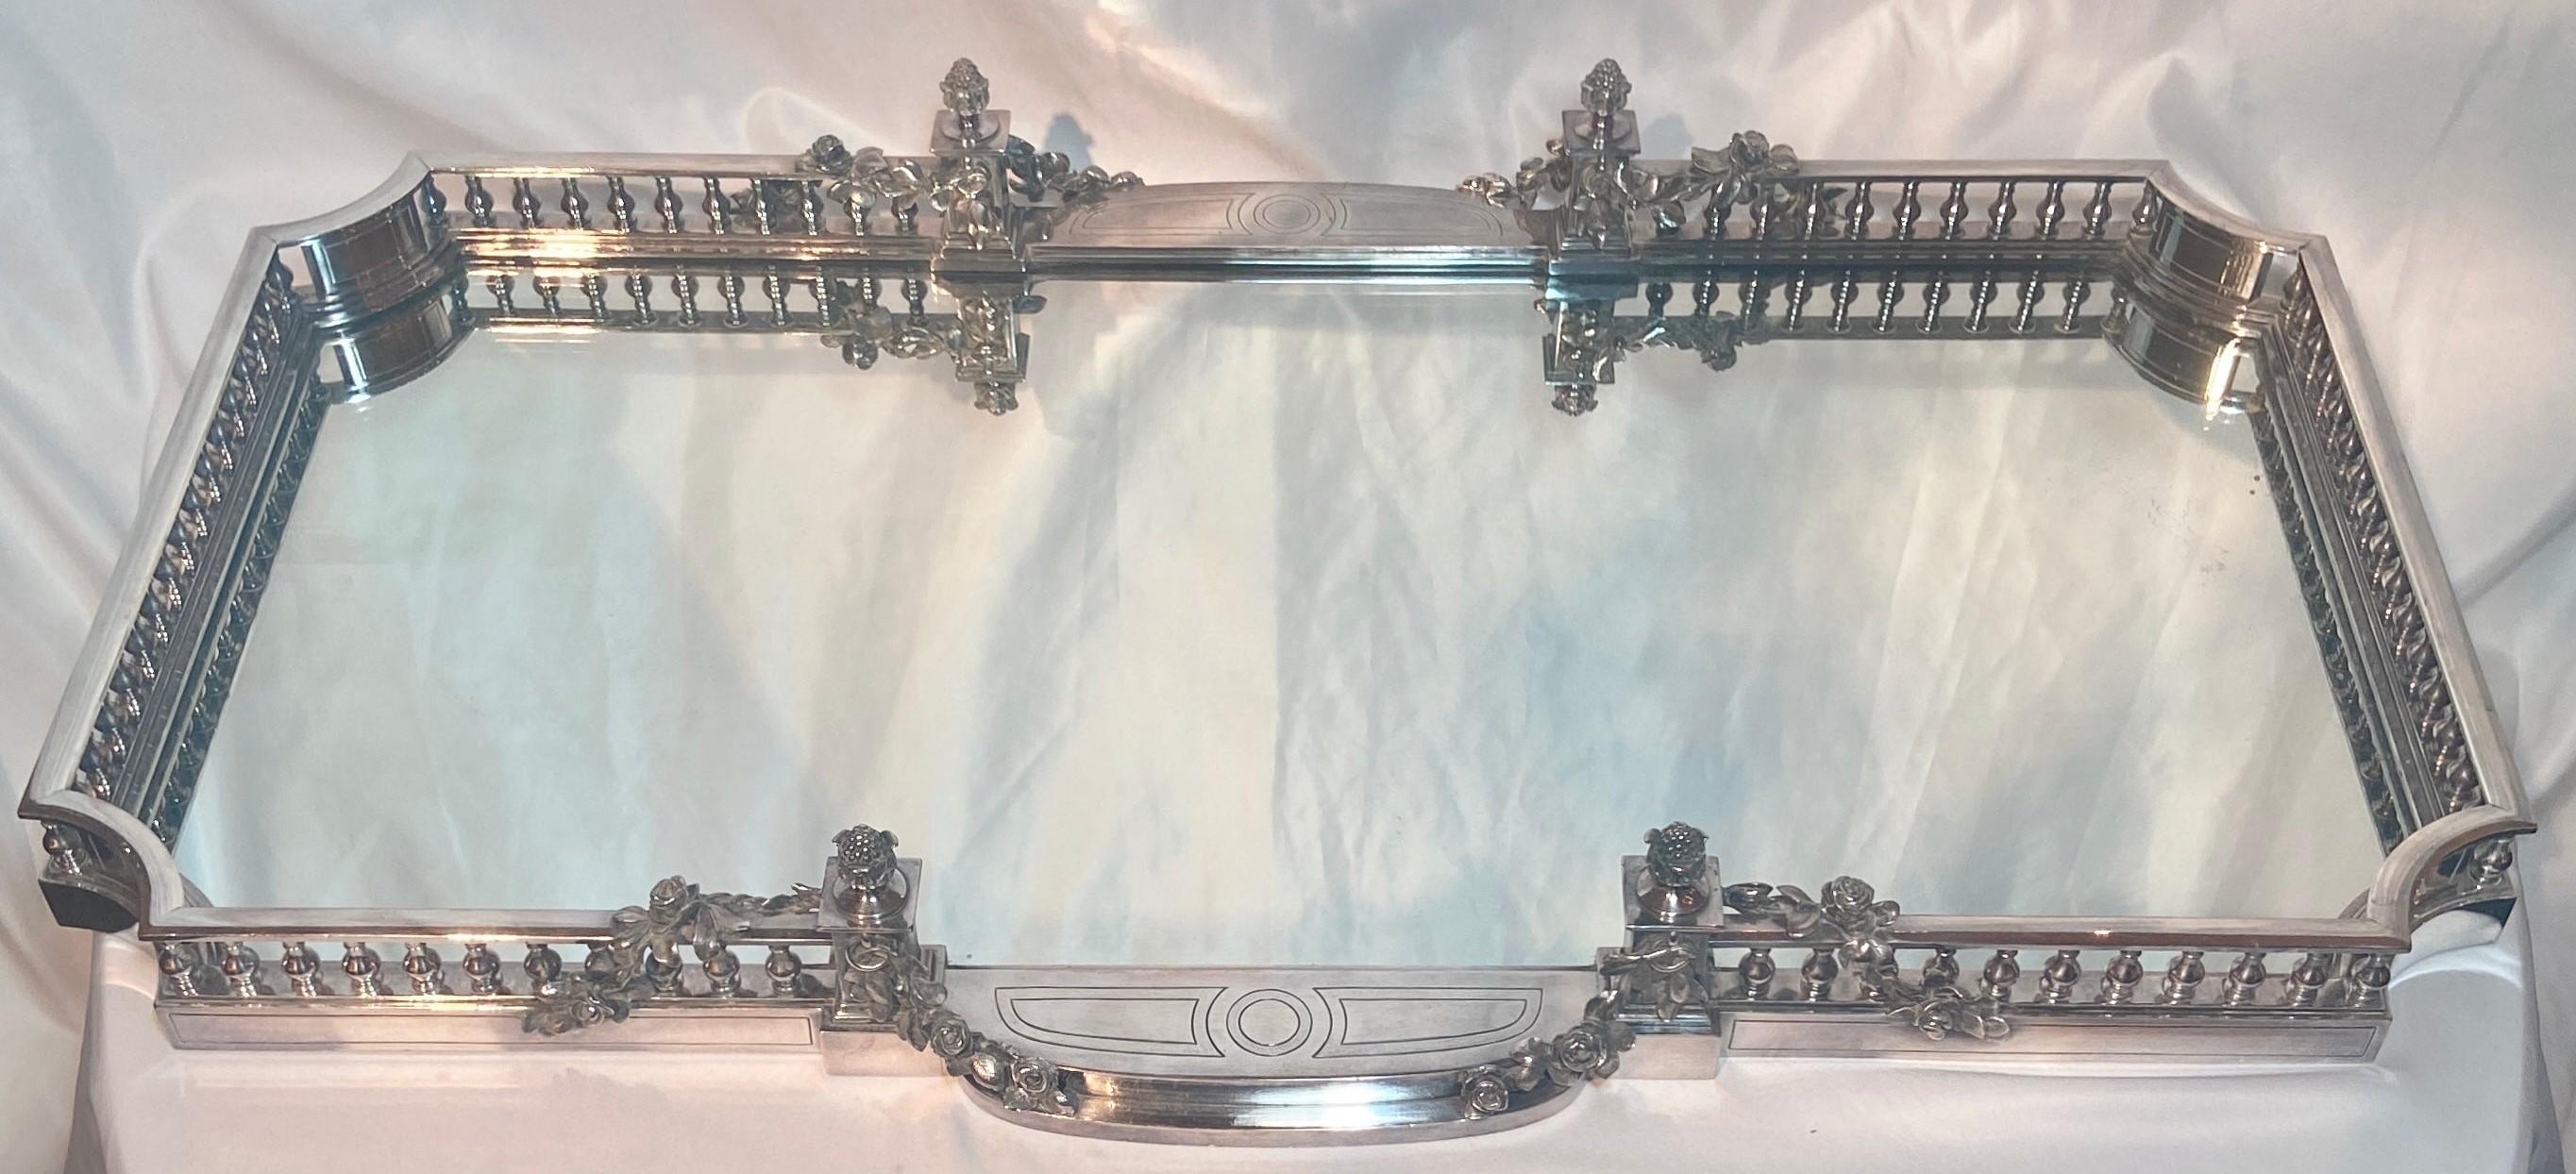 Antique French silvered bronze mirrored plateau in the form of a garden terrace made by Parisian Silversmith, 